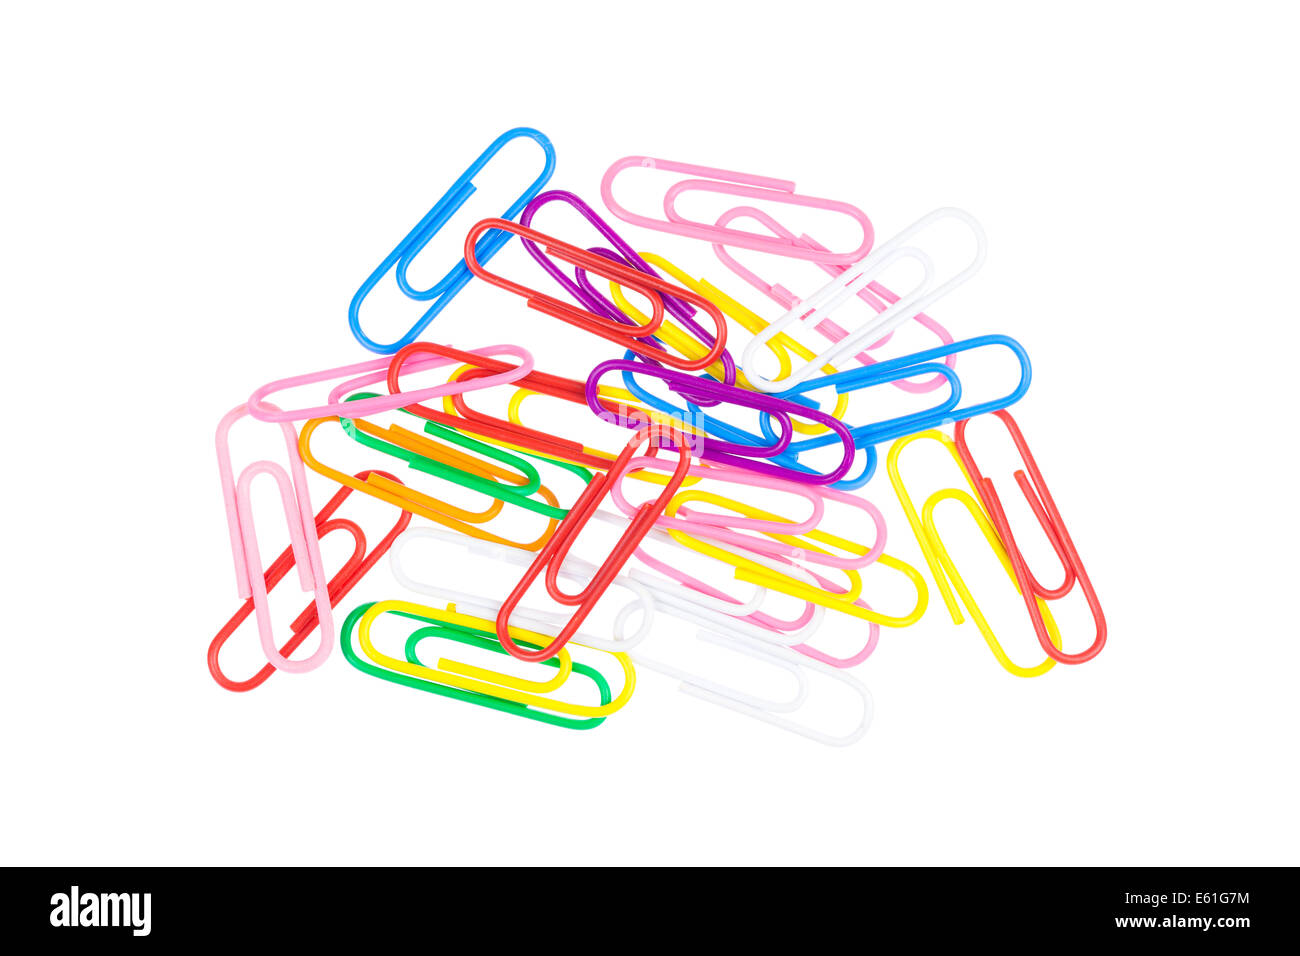 Coloured paper clips on a white background Stock Photo